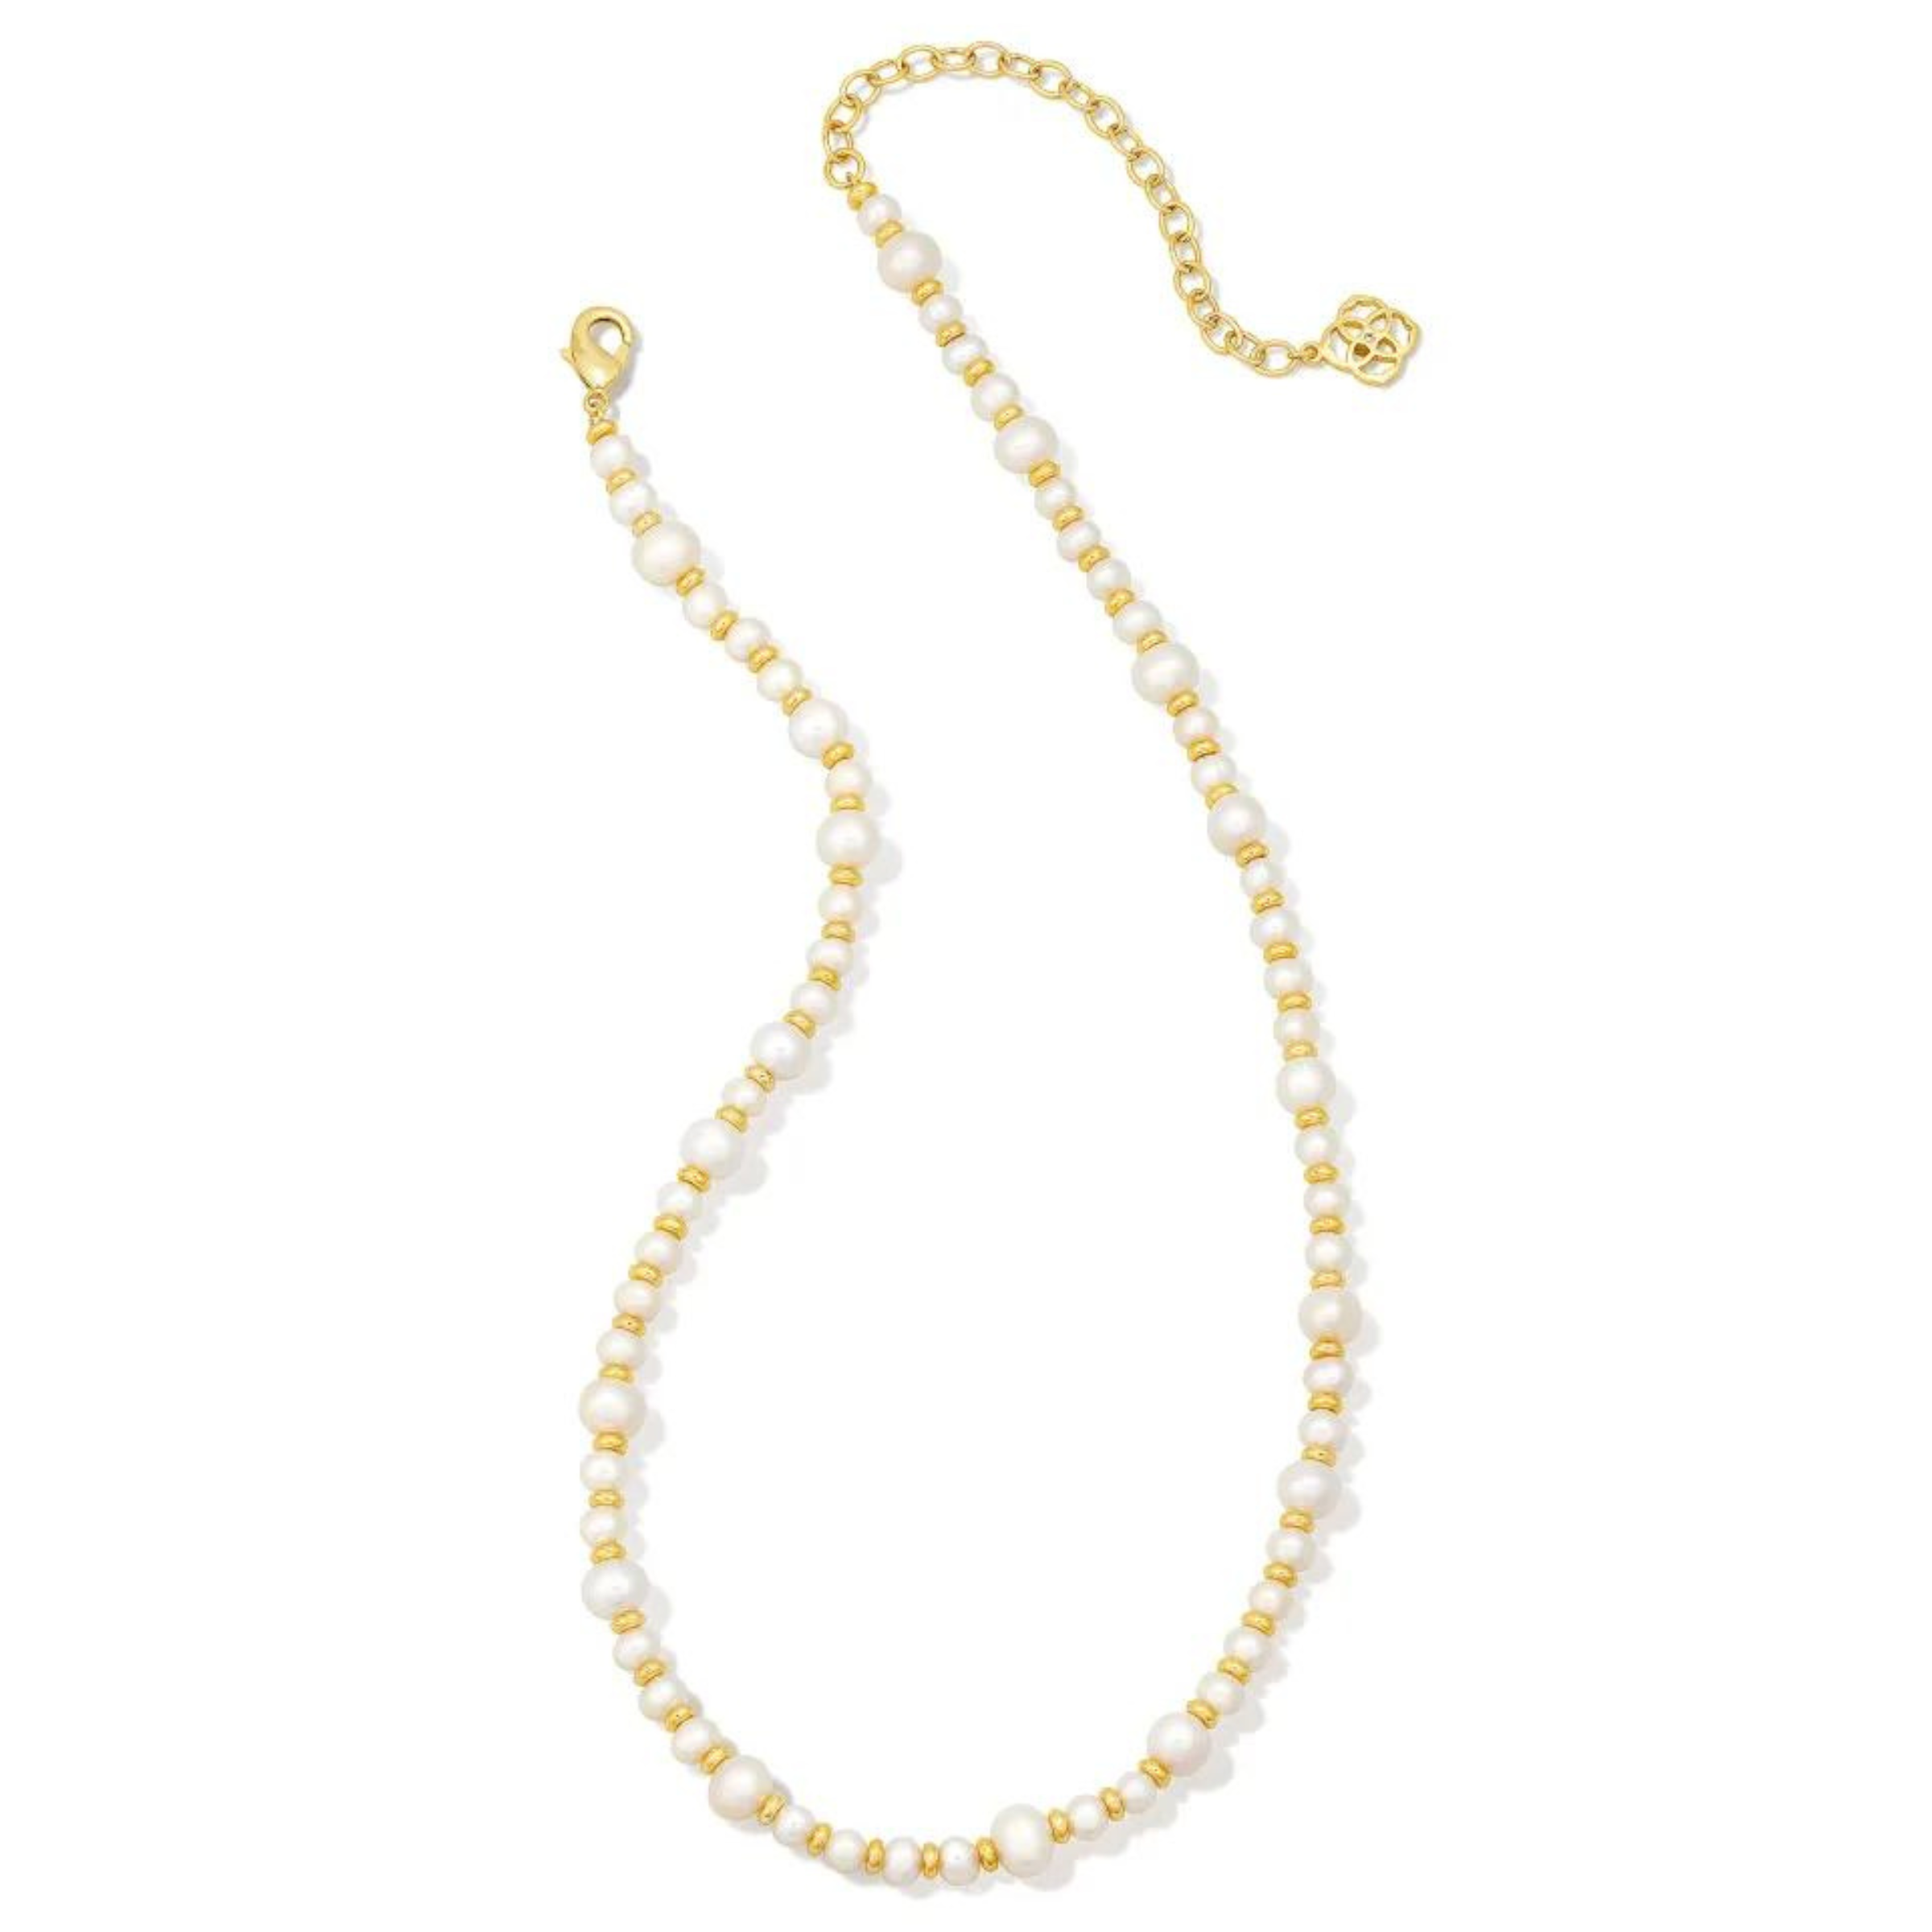 Gold spacers and varying size white pearl beaded necklace. This necklace is pictured on a white background. 